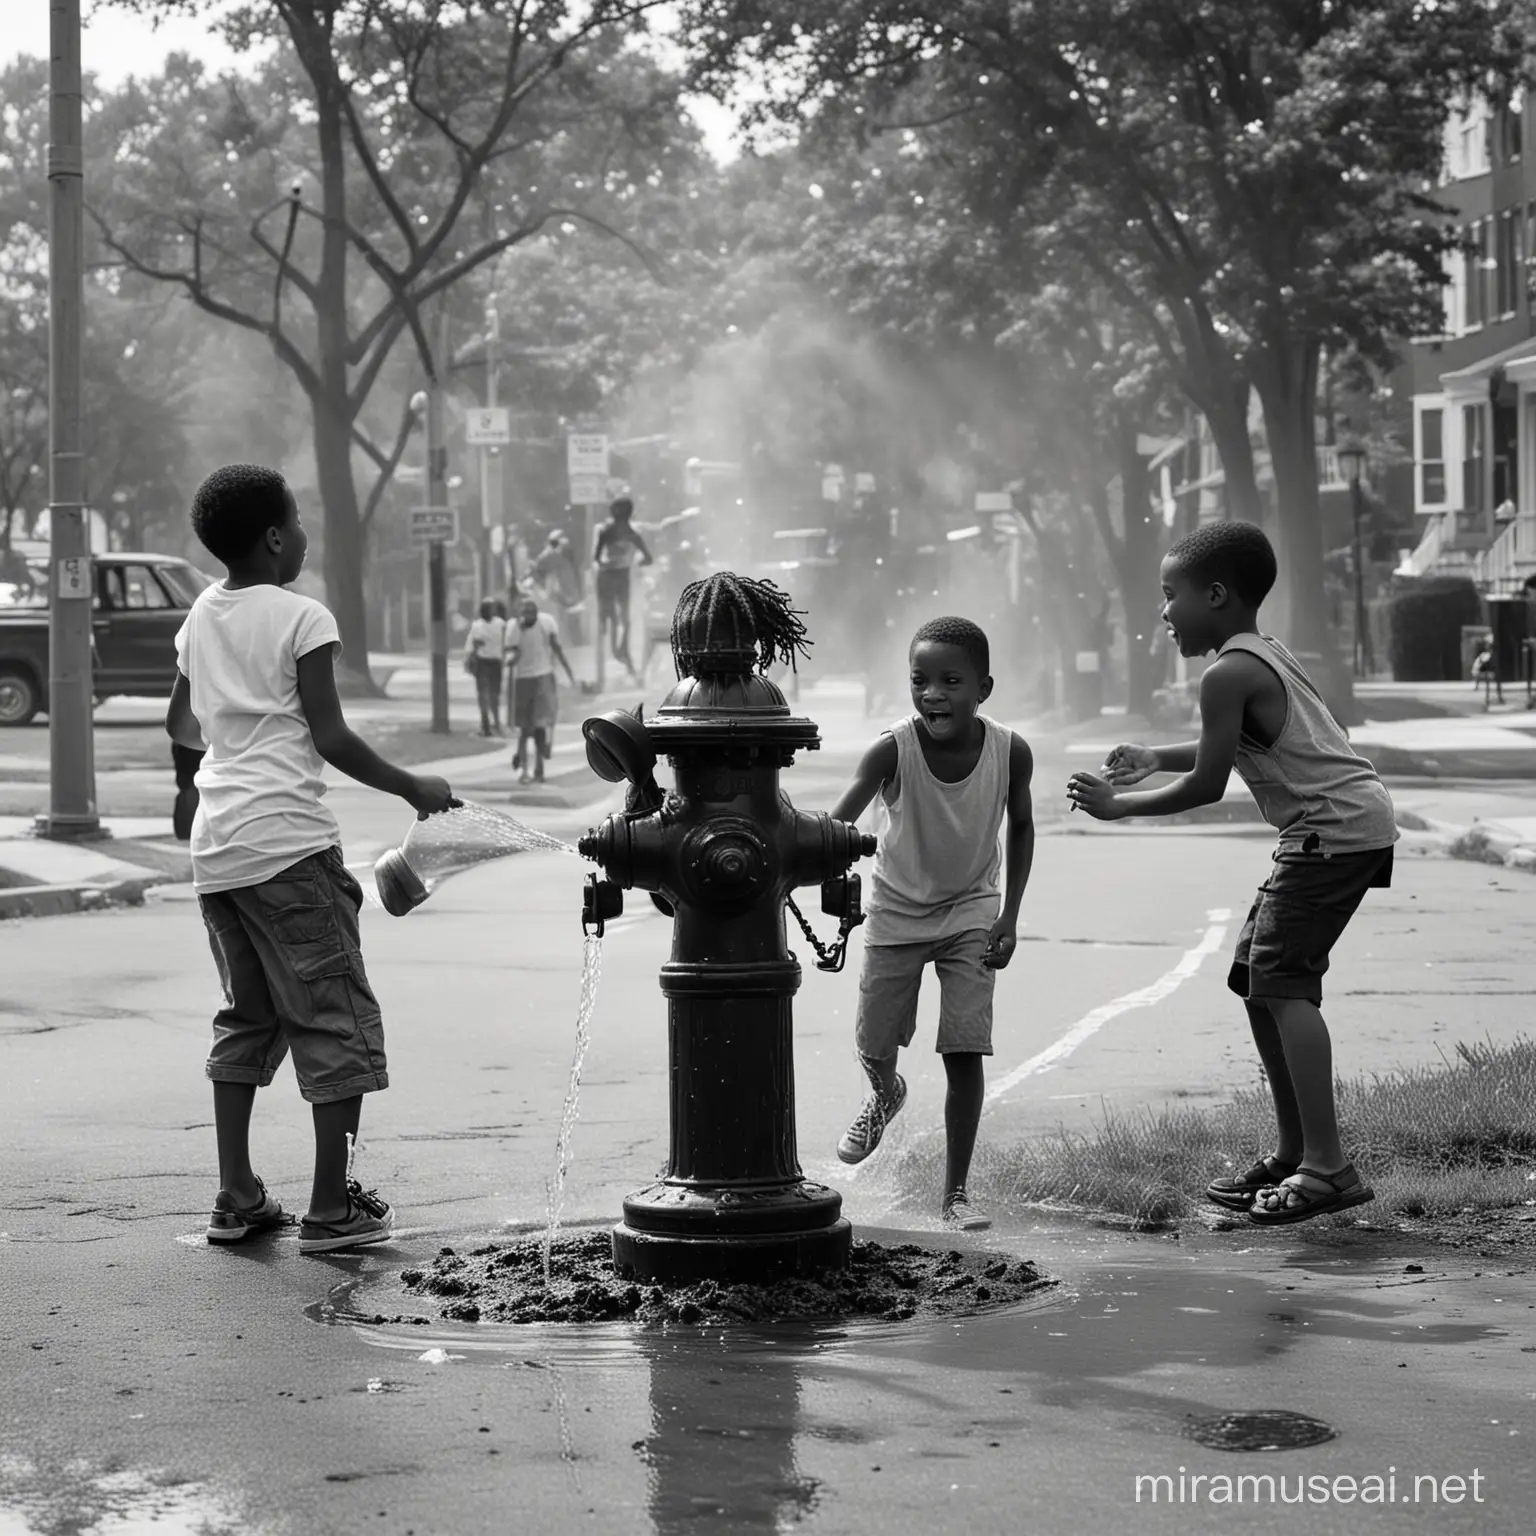 black children, playing in fire hydrant